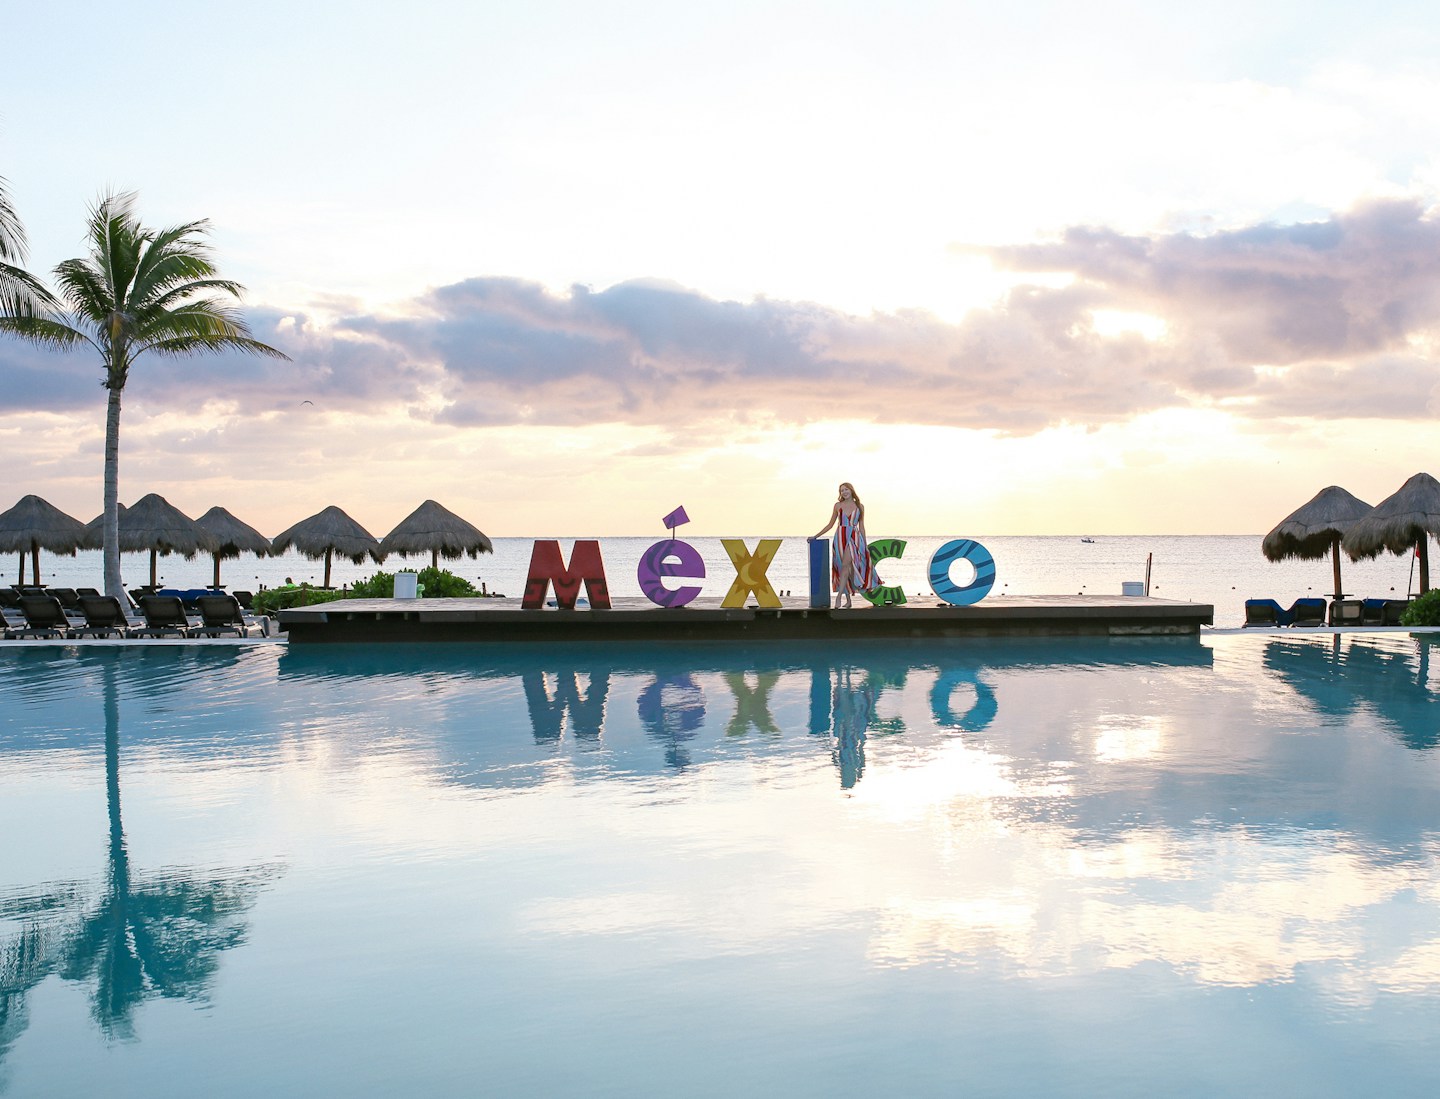 Ocean Riviera Paradise Review: Sharing my experience at this 5 star all-inclusive resort in Playa del Carmen, Mexico. From gourmet gluten-free food to gorgeous pools, rooms and beaches, we had a great time at this resort.